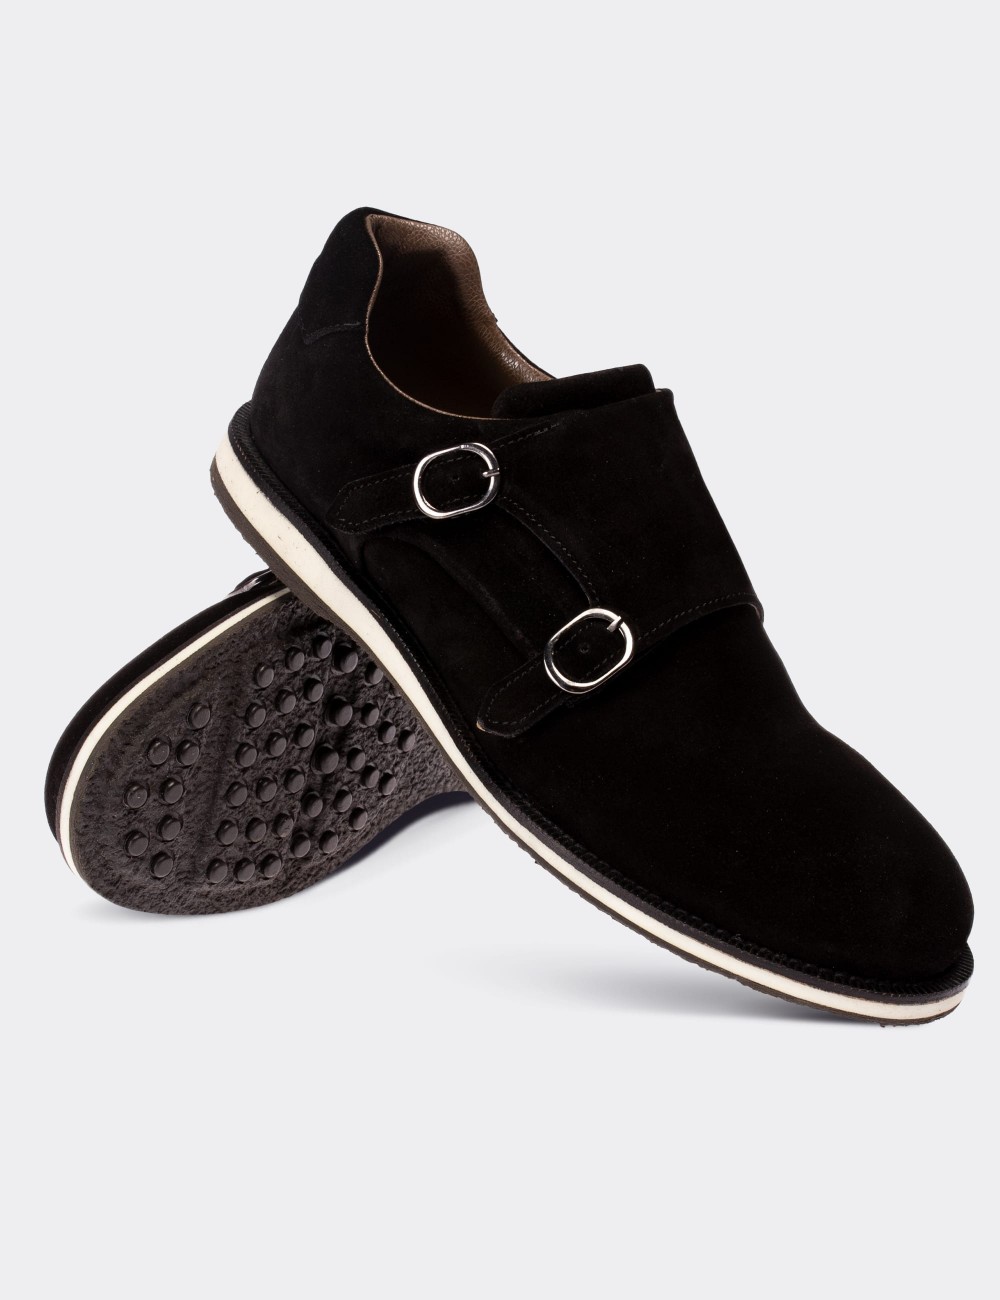 Black Suede Leather Monk-Strap Lace-up Shoes - 01742MSYHE01